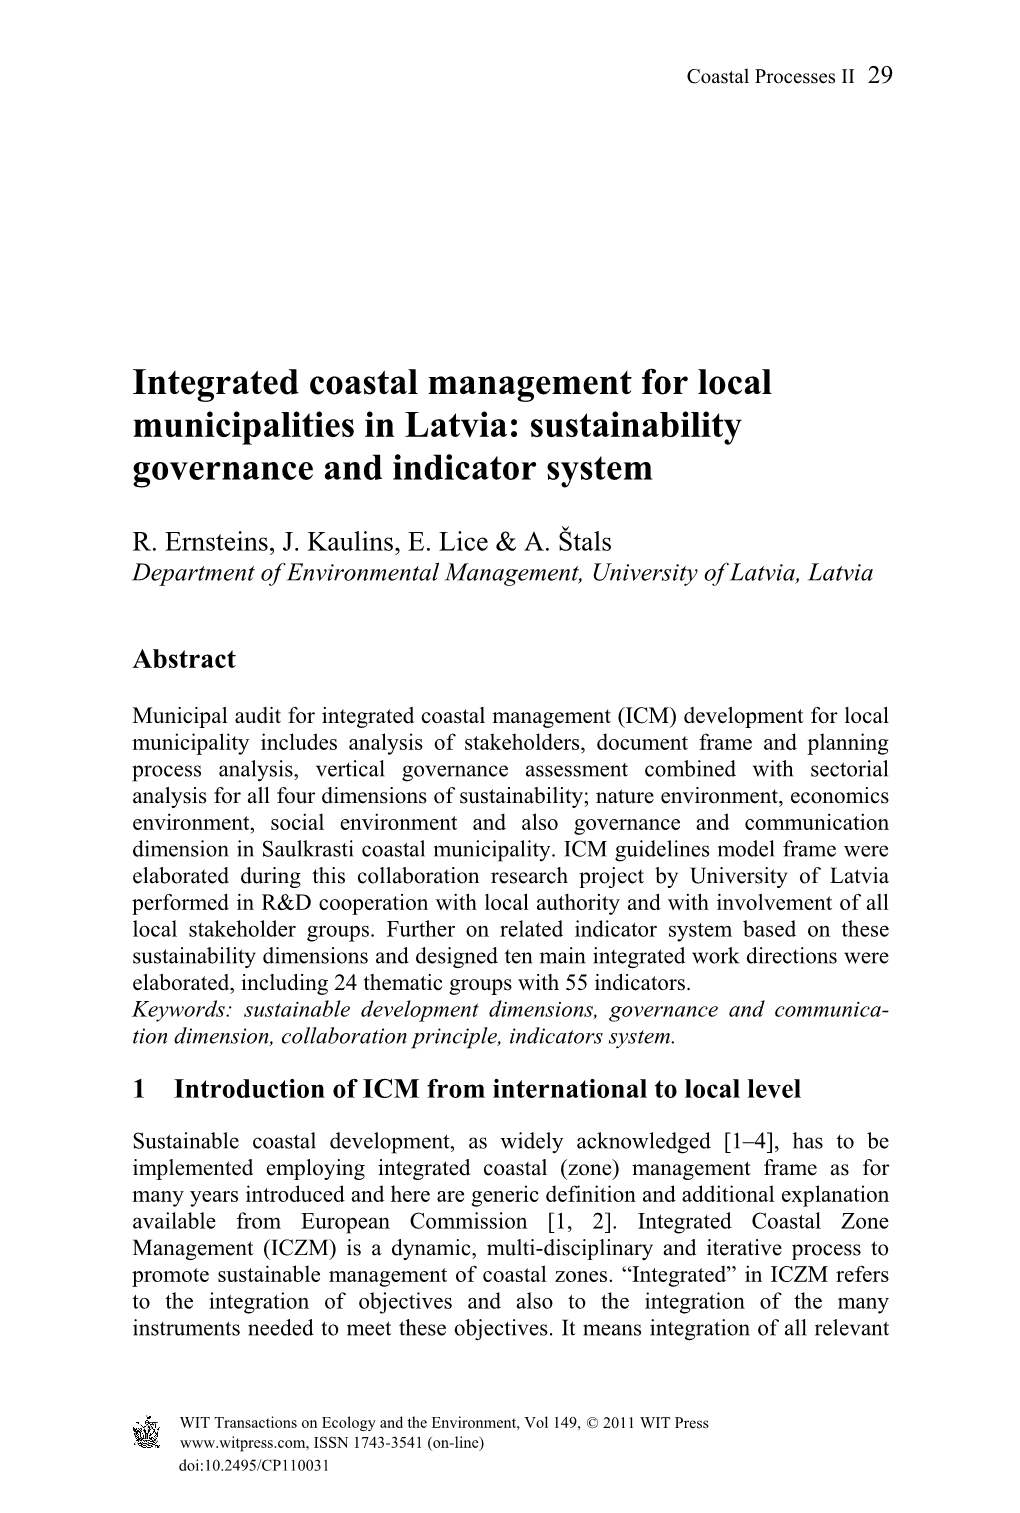 Integrated Coastal Management for Local Municipalities in Latvia: Sustainability Governance and Indicator System